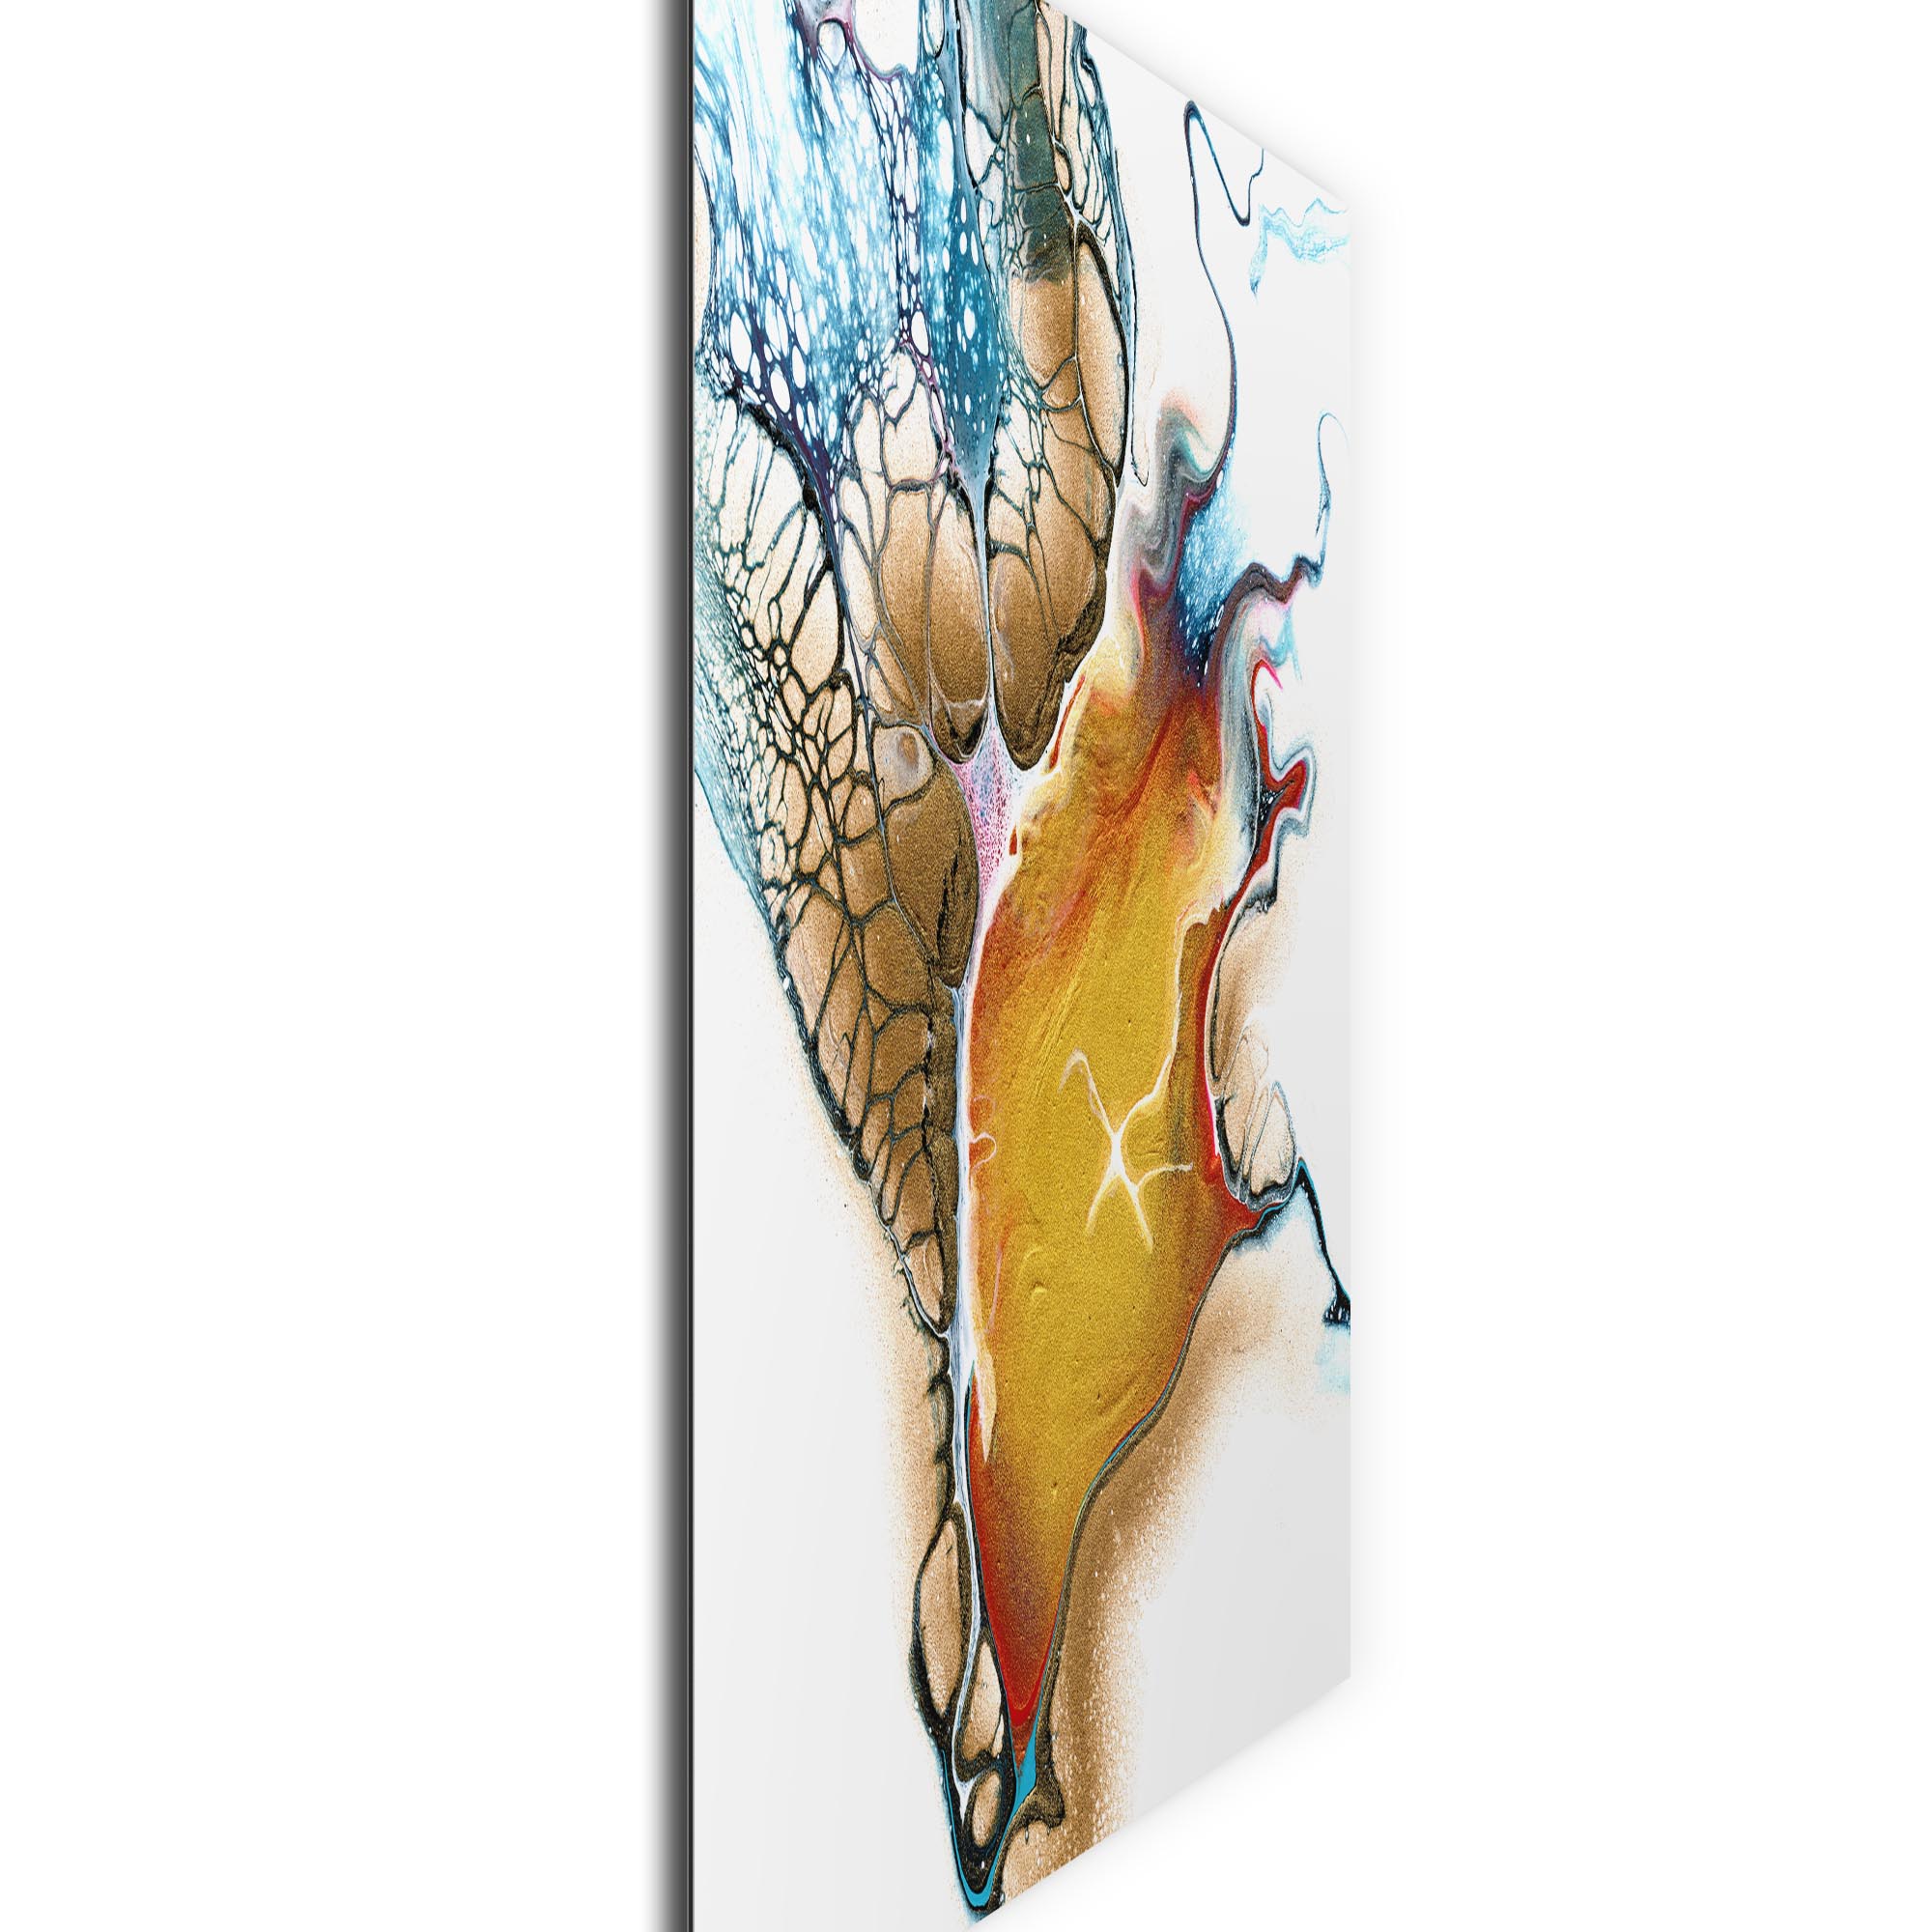 Tributaries by Elana Reiter - Abstract Wall Art, Modern Home Decor (36in x 36in) - Image 2